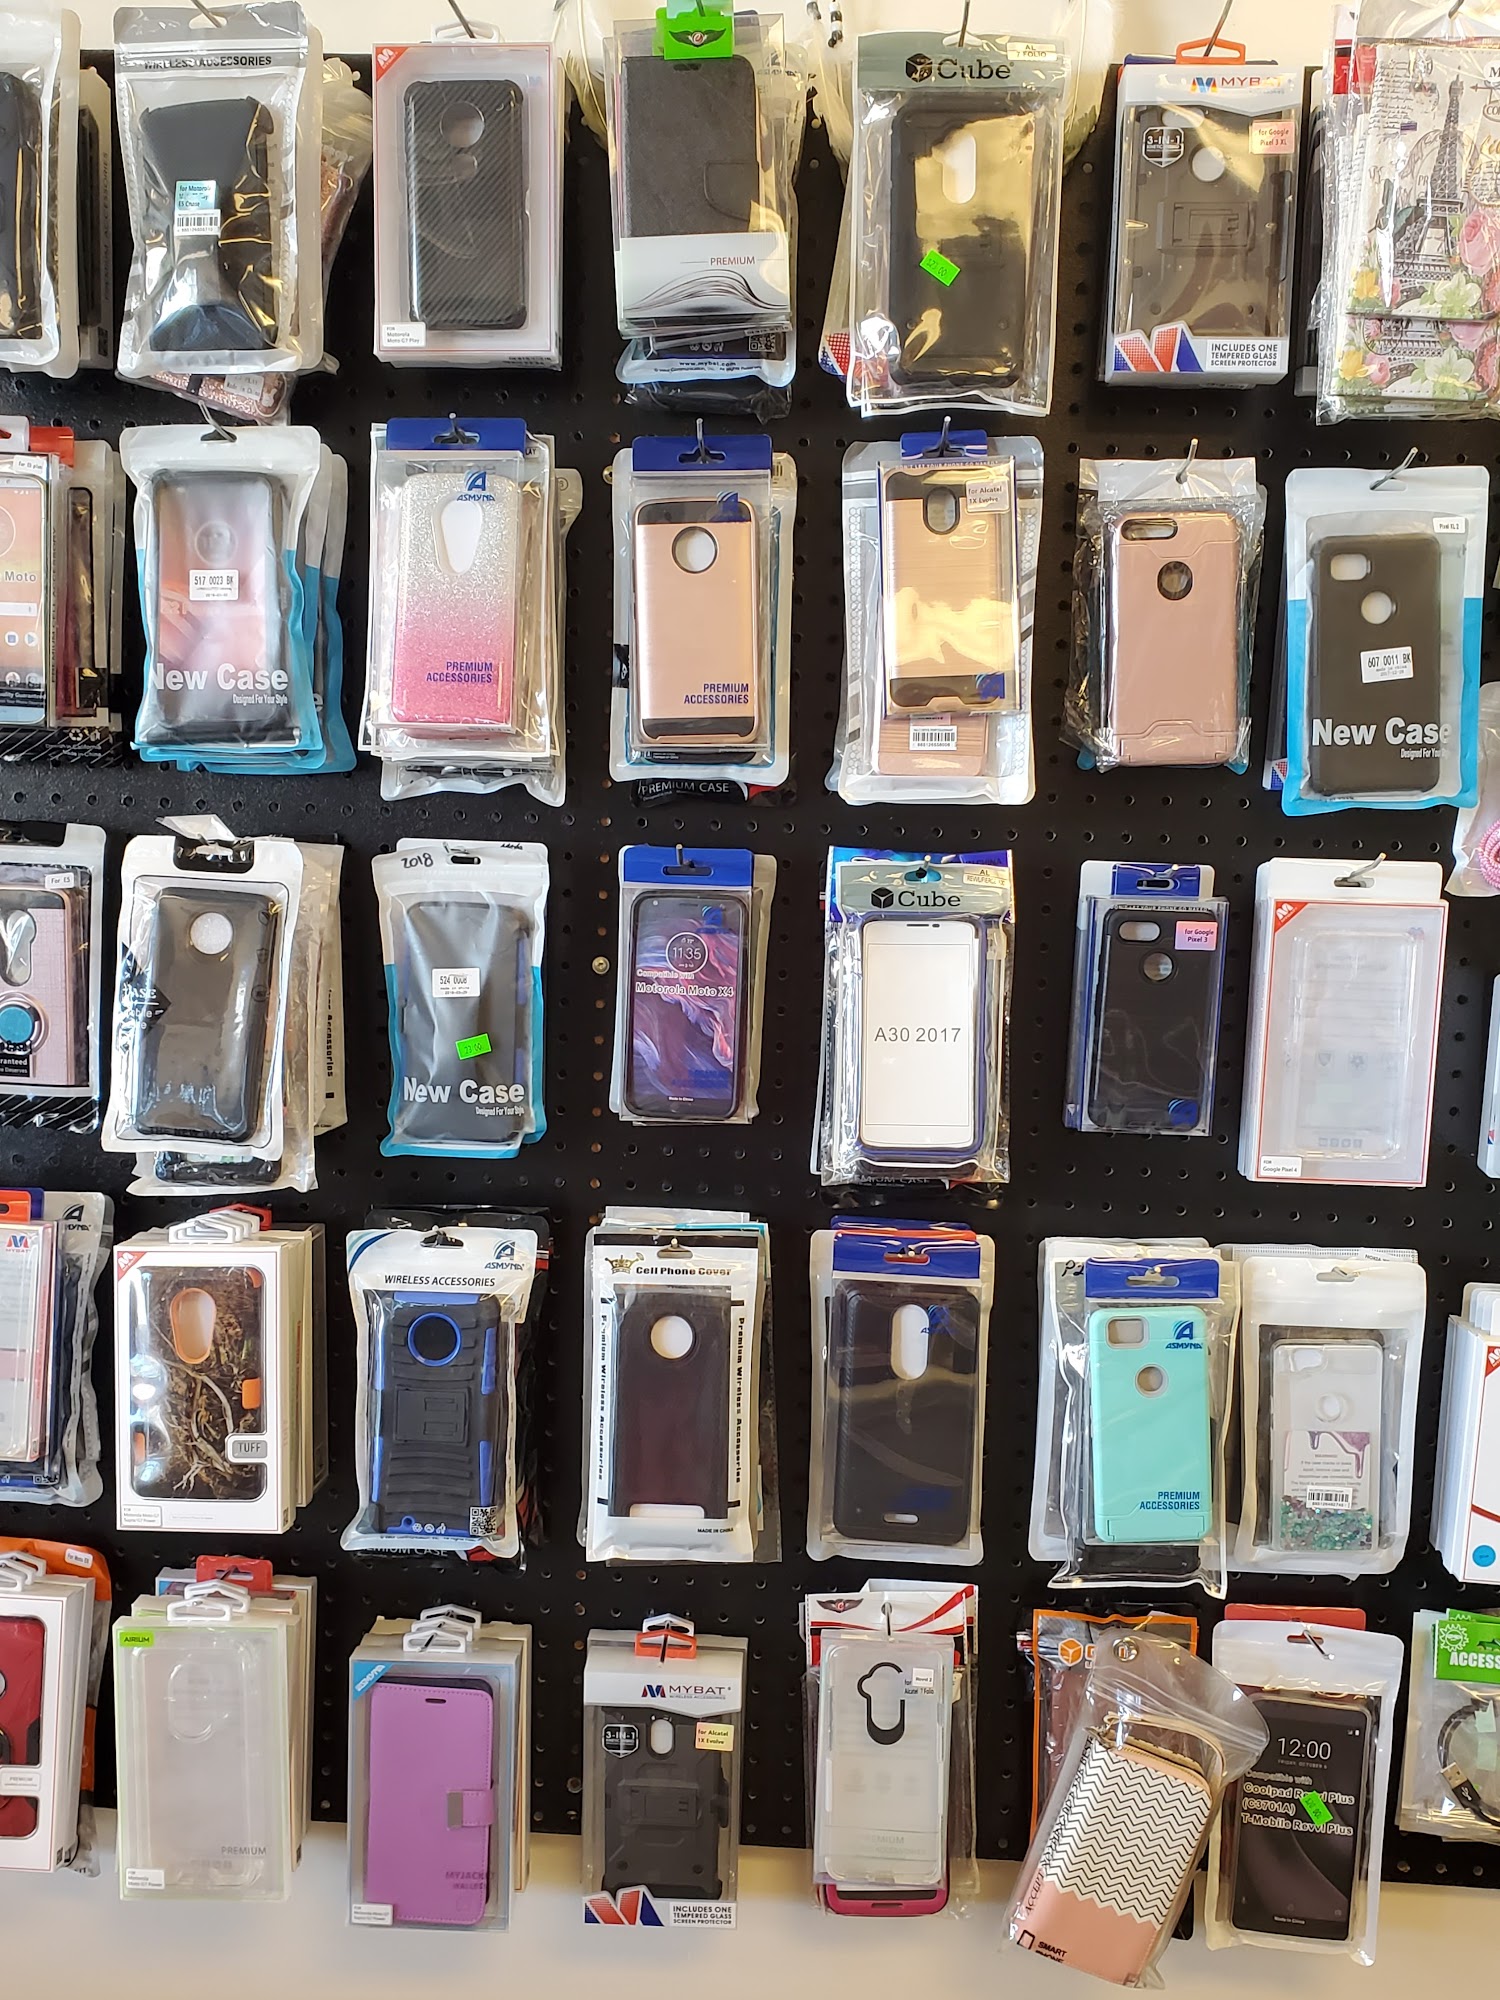 Debs Cellphone Accessories - Cell Phone Cases Store, Cell Phone Accessories, Mobile Accessories